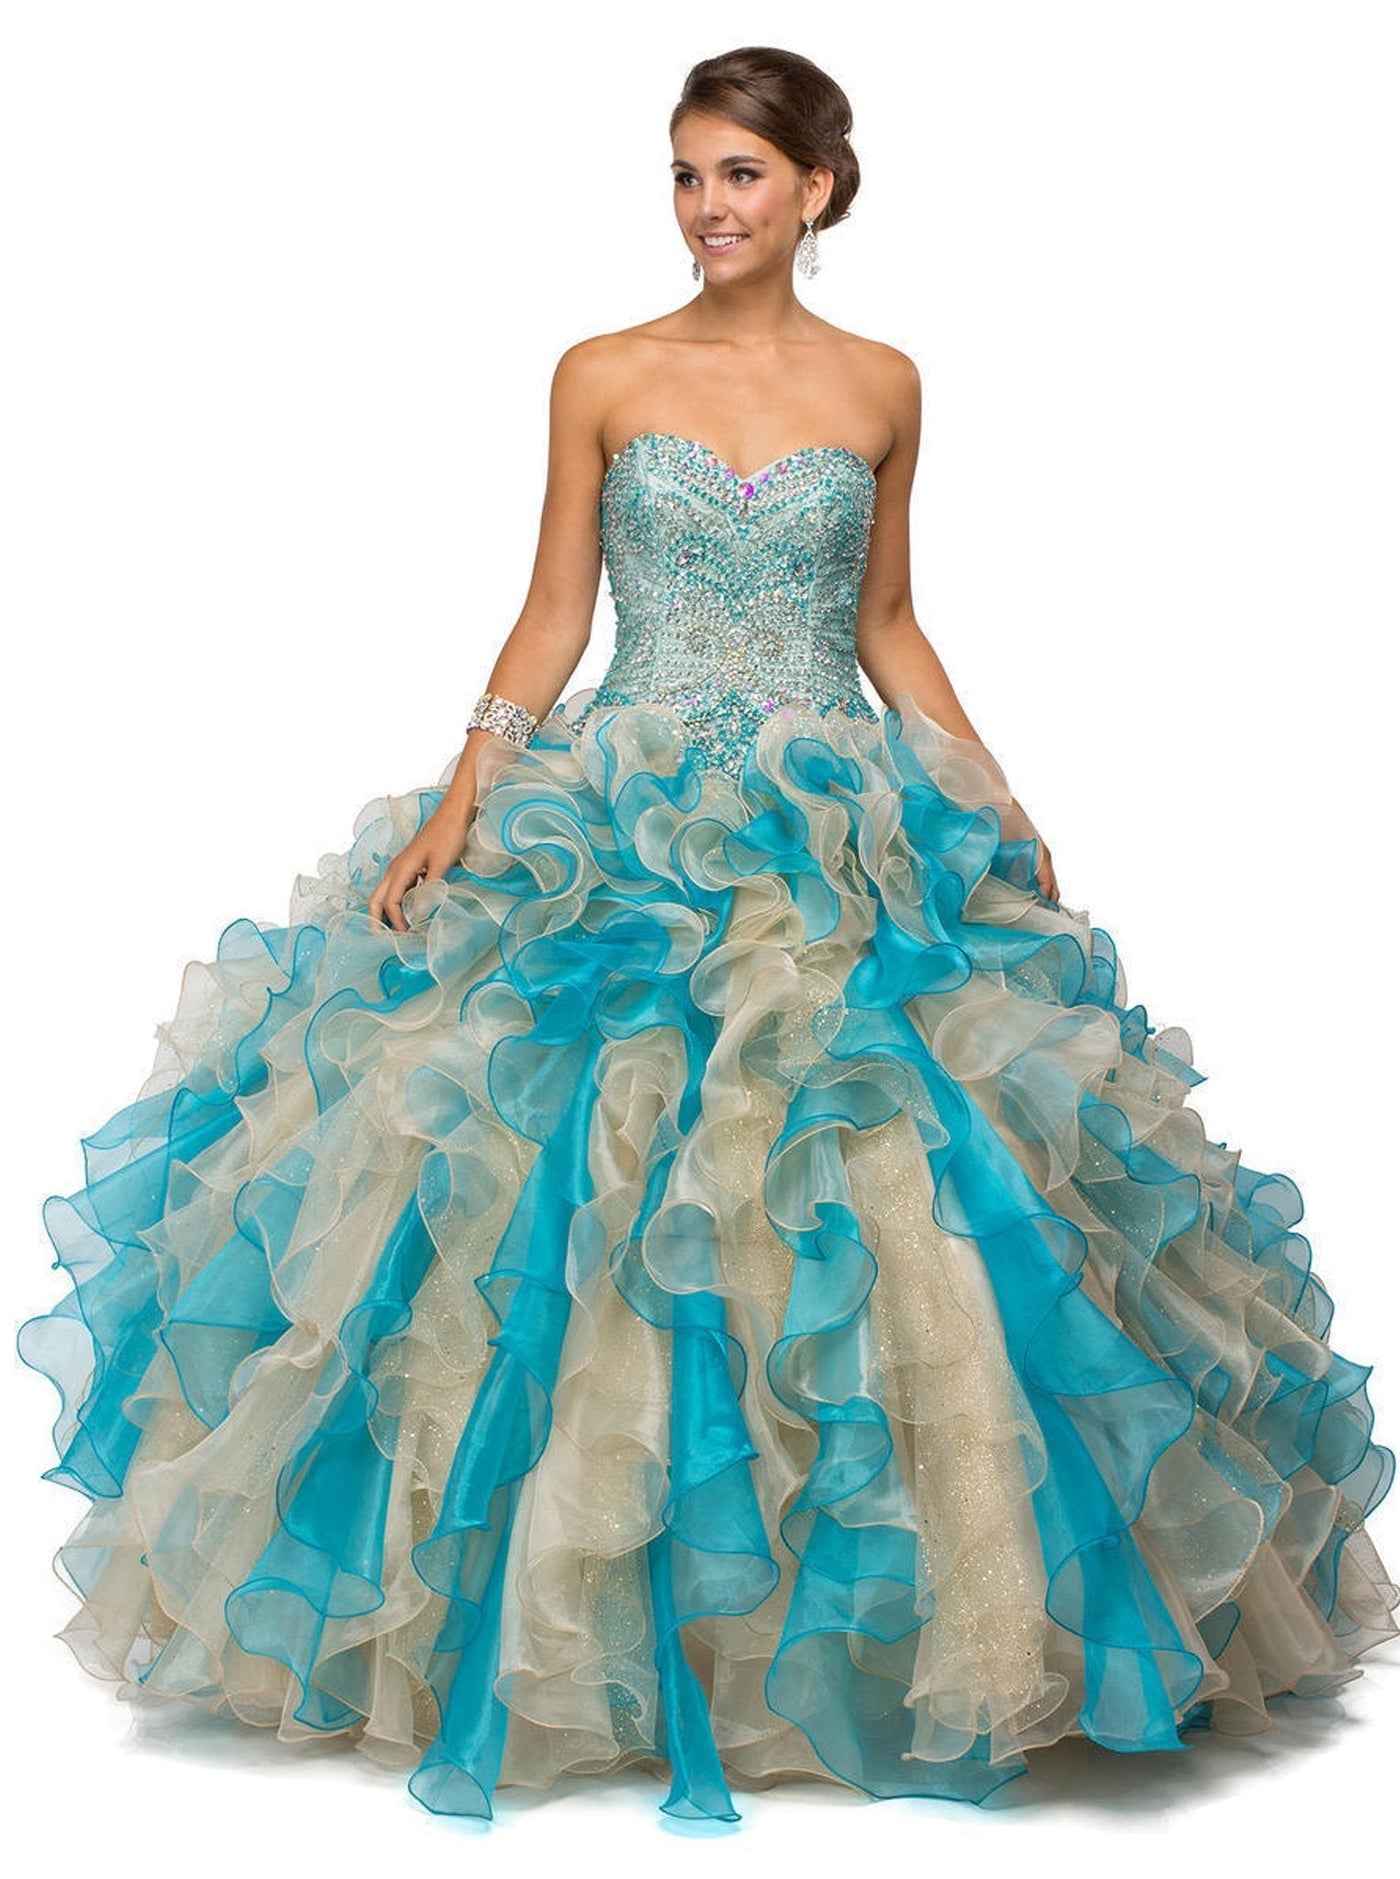 Dancing Queen - 8947 Shimmering Strapless Ruffled Quinceanera Ballgown Special Occasion Dress XS / Champ/Turquoise